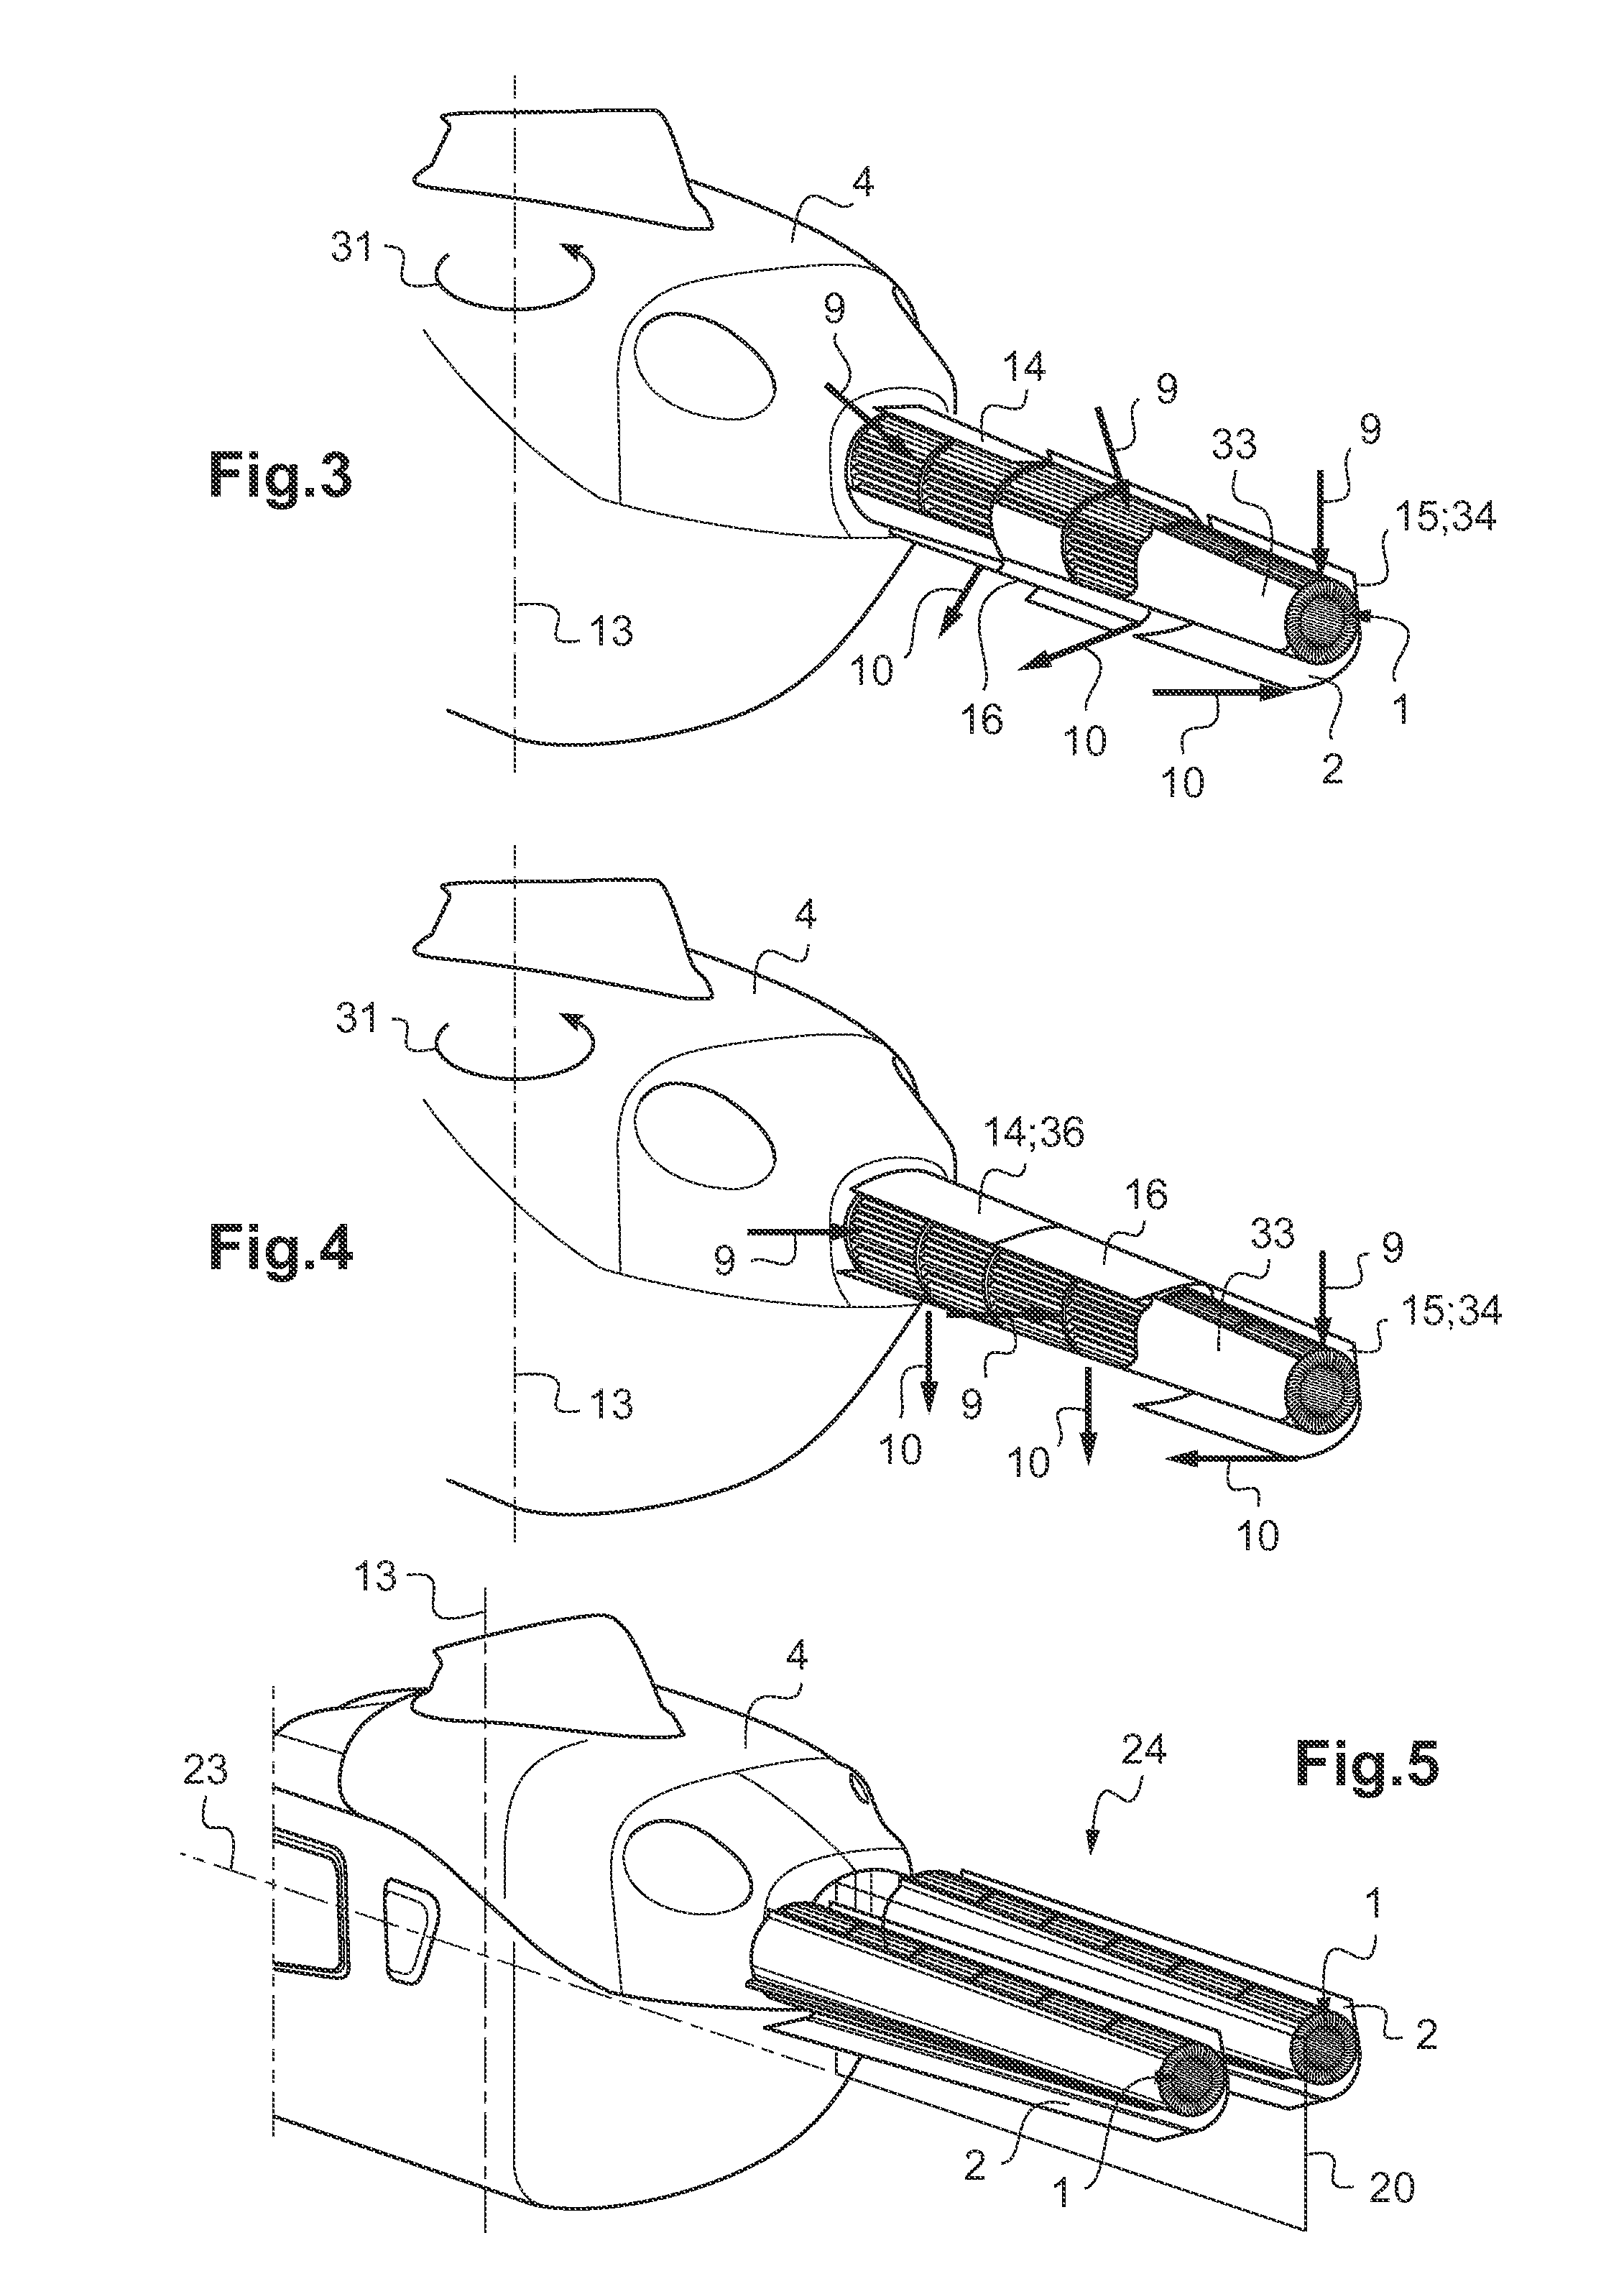 Helicopter with cross-flow fan